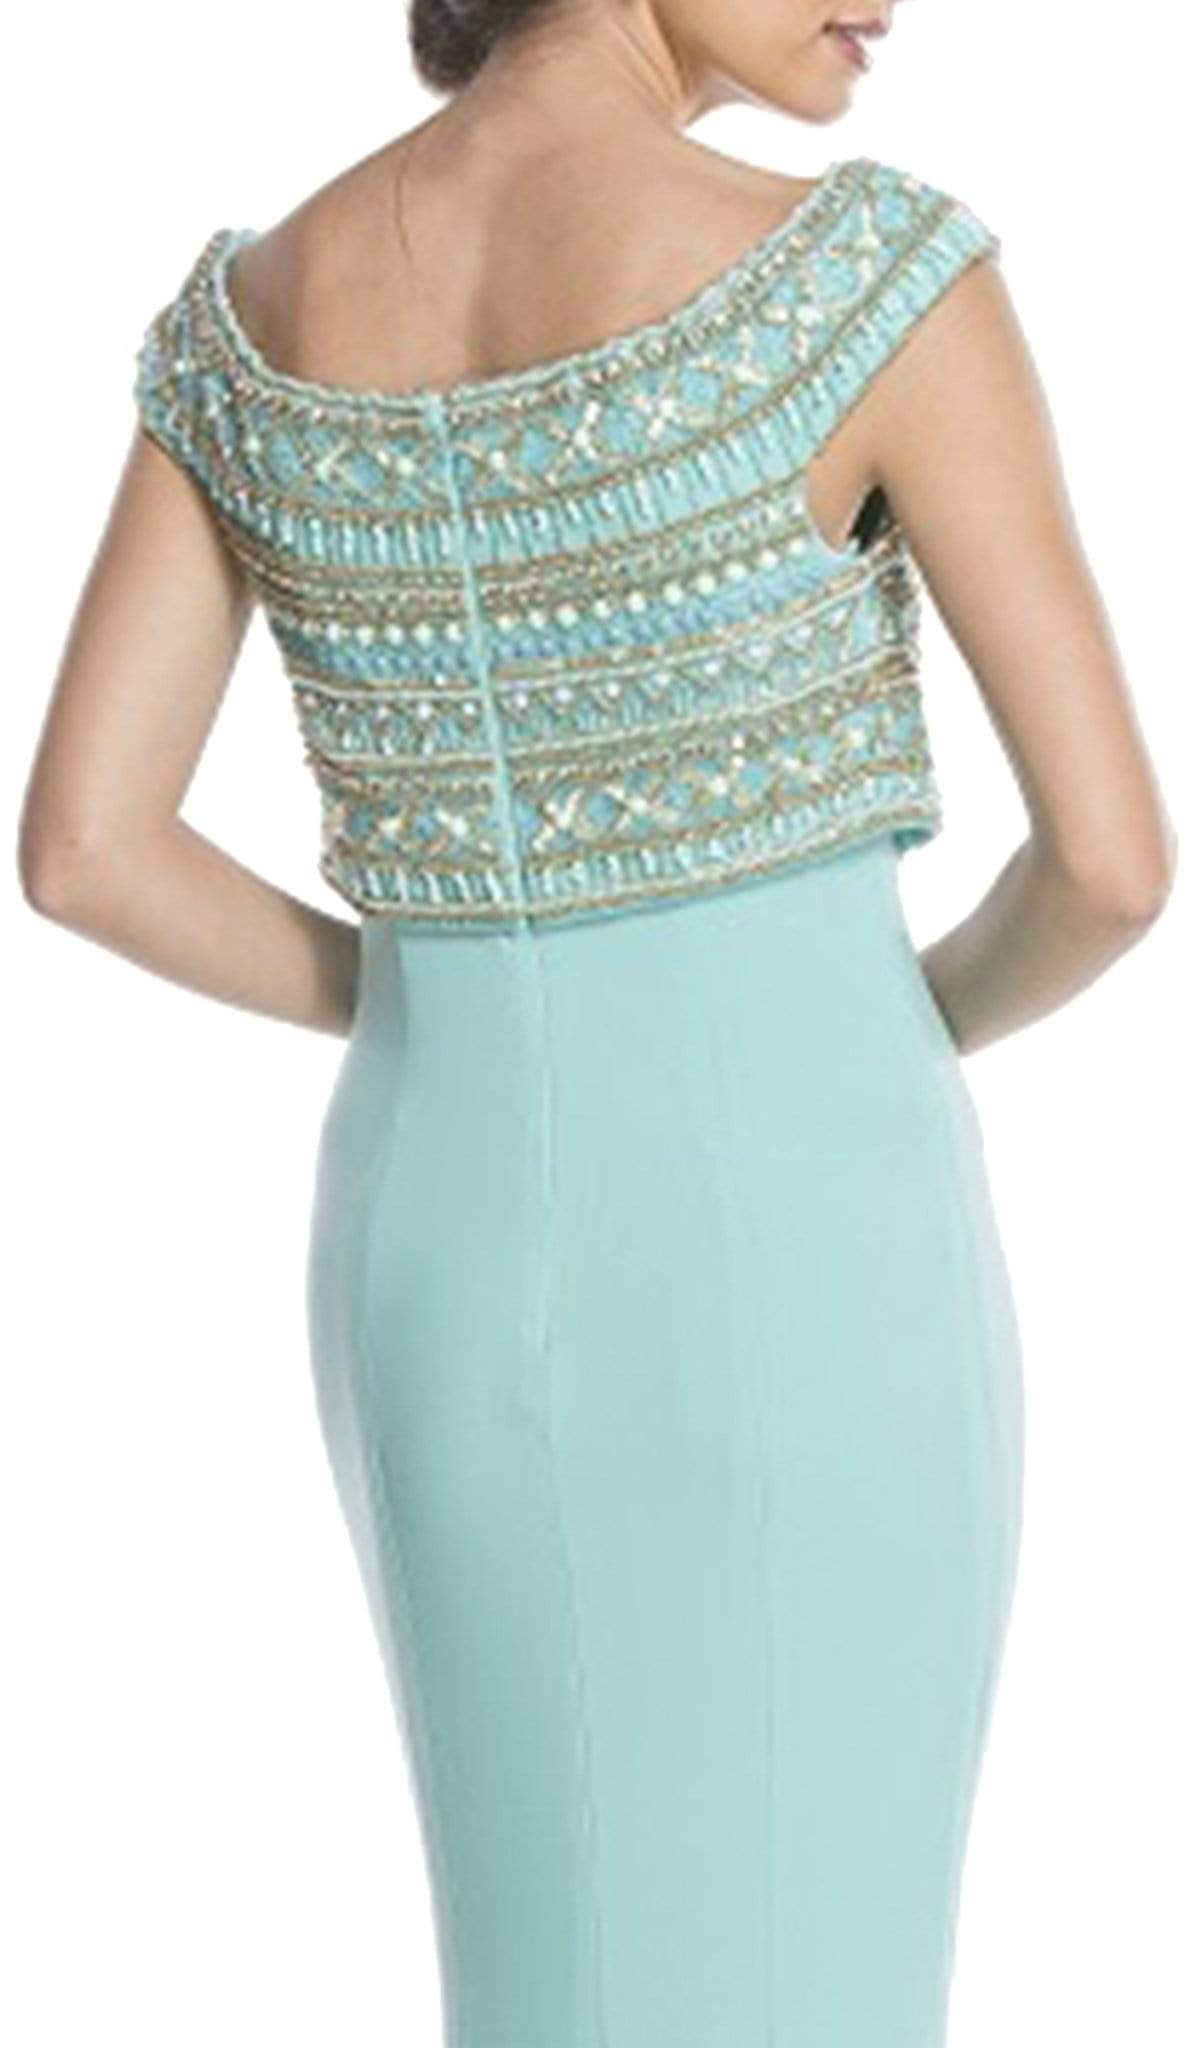 Bedazzled Bateau Neck Fitted Prom Dress Dress